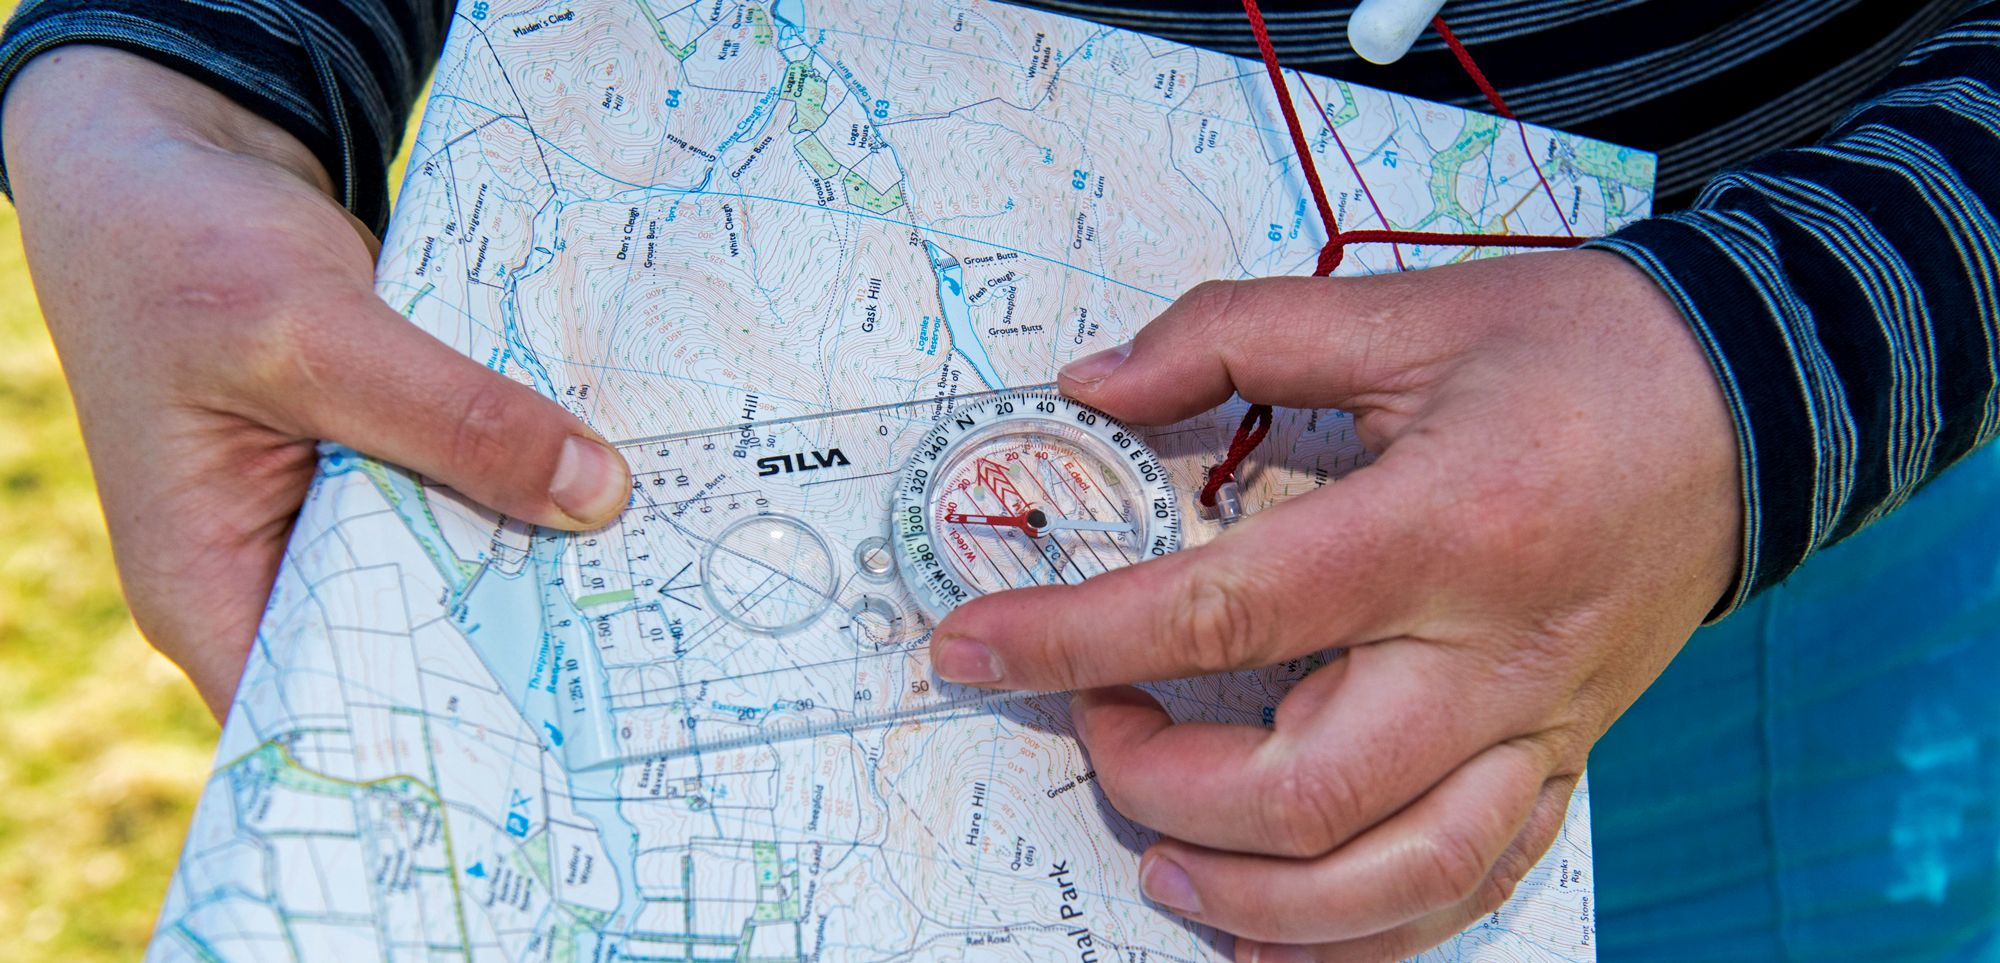 Map & Compass 101 Sunday, April 24th @ 6pm